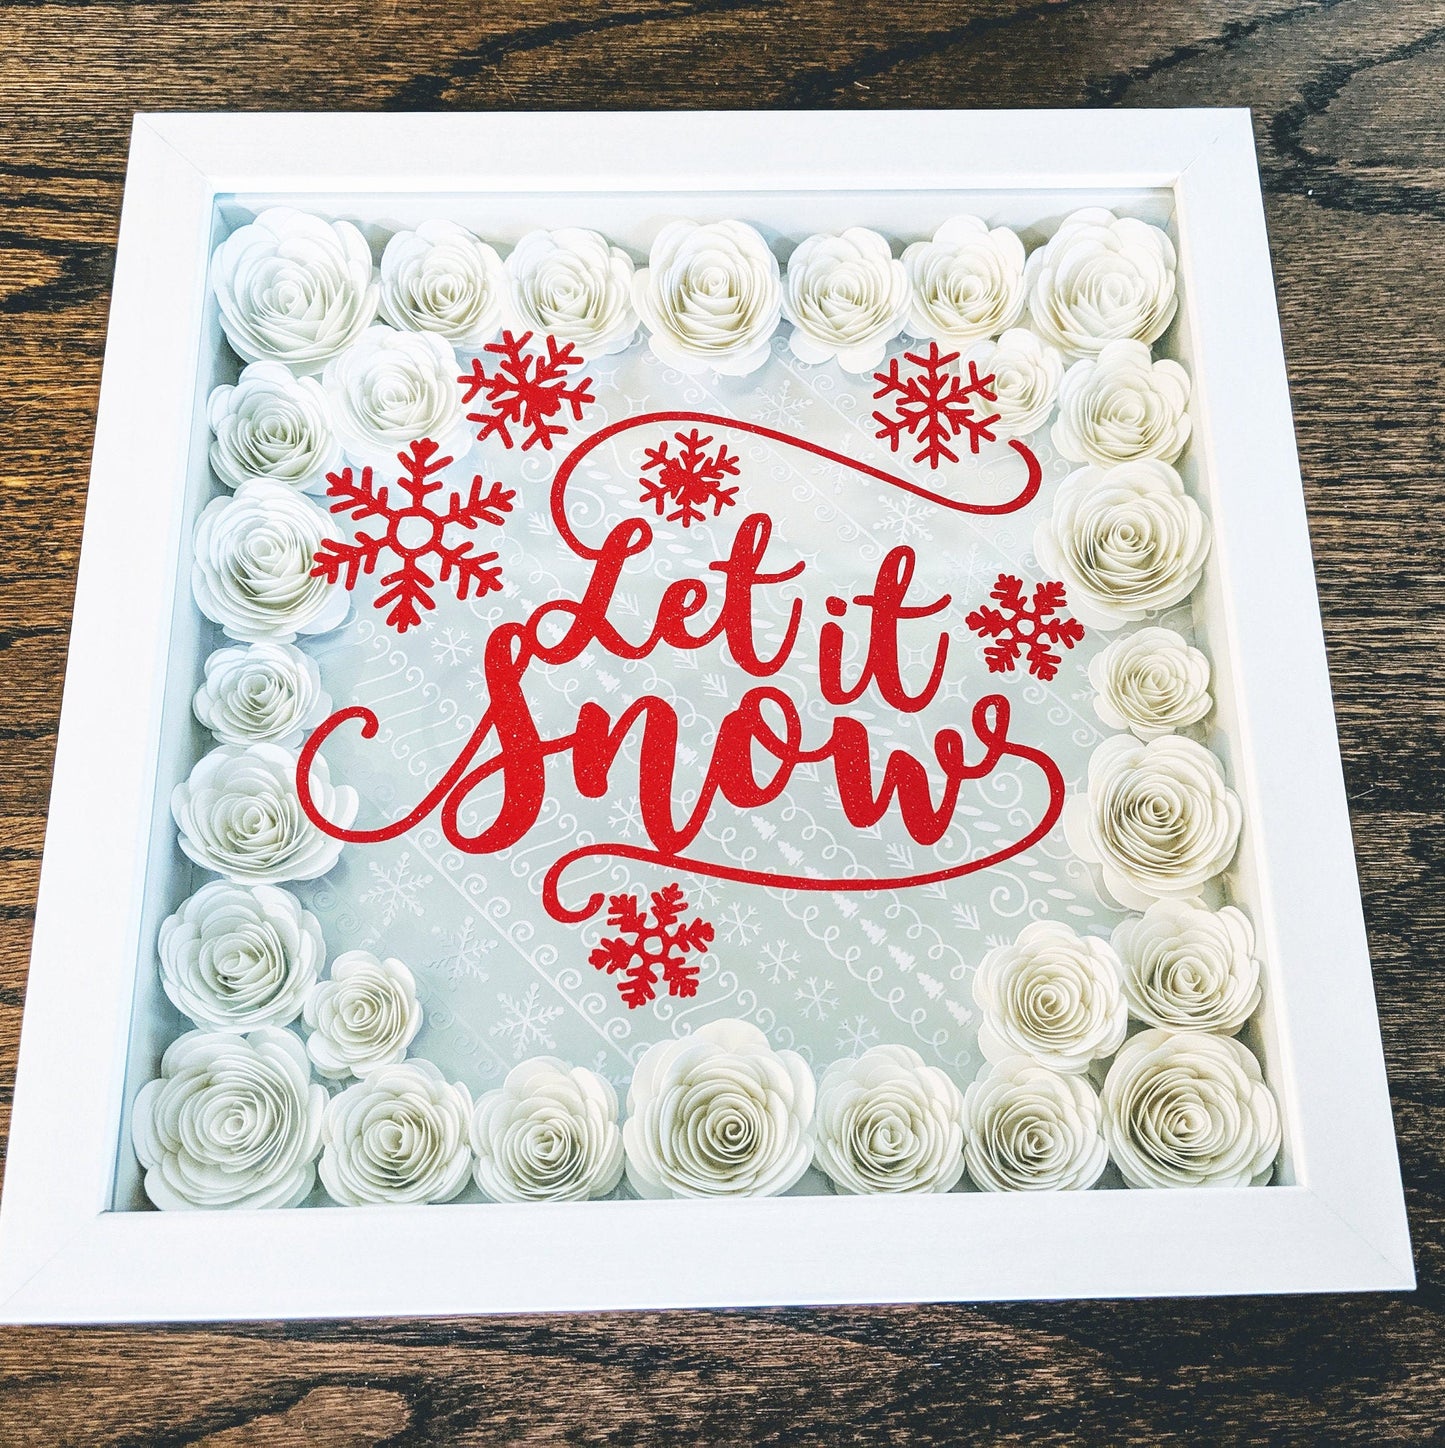 Let it snow rolled paper flower shadow box holiday home decor